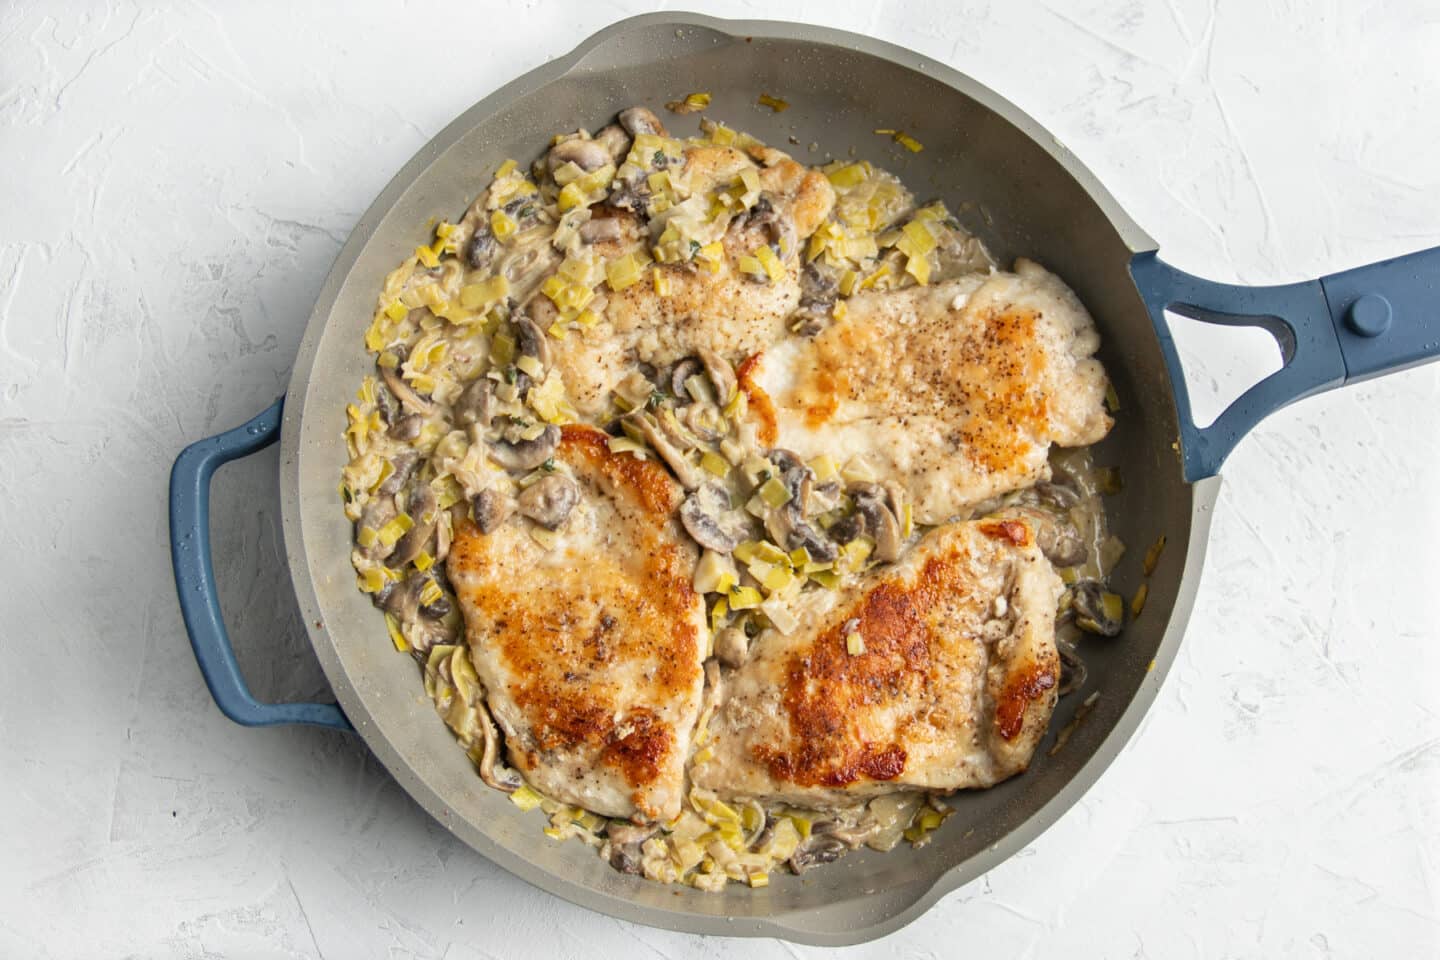 Photo of skillet after returning chicken to skillet with creamy mushroom and leek sauce. 